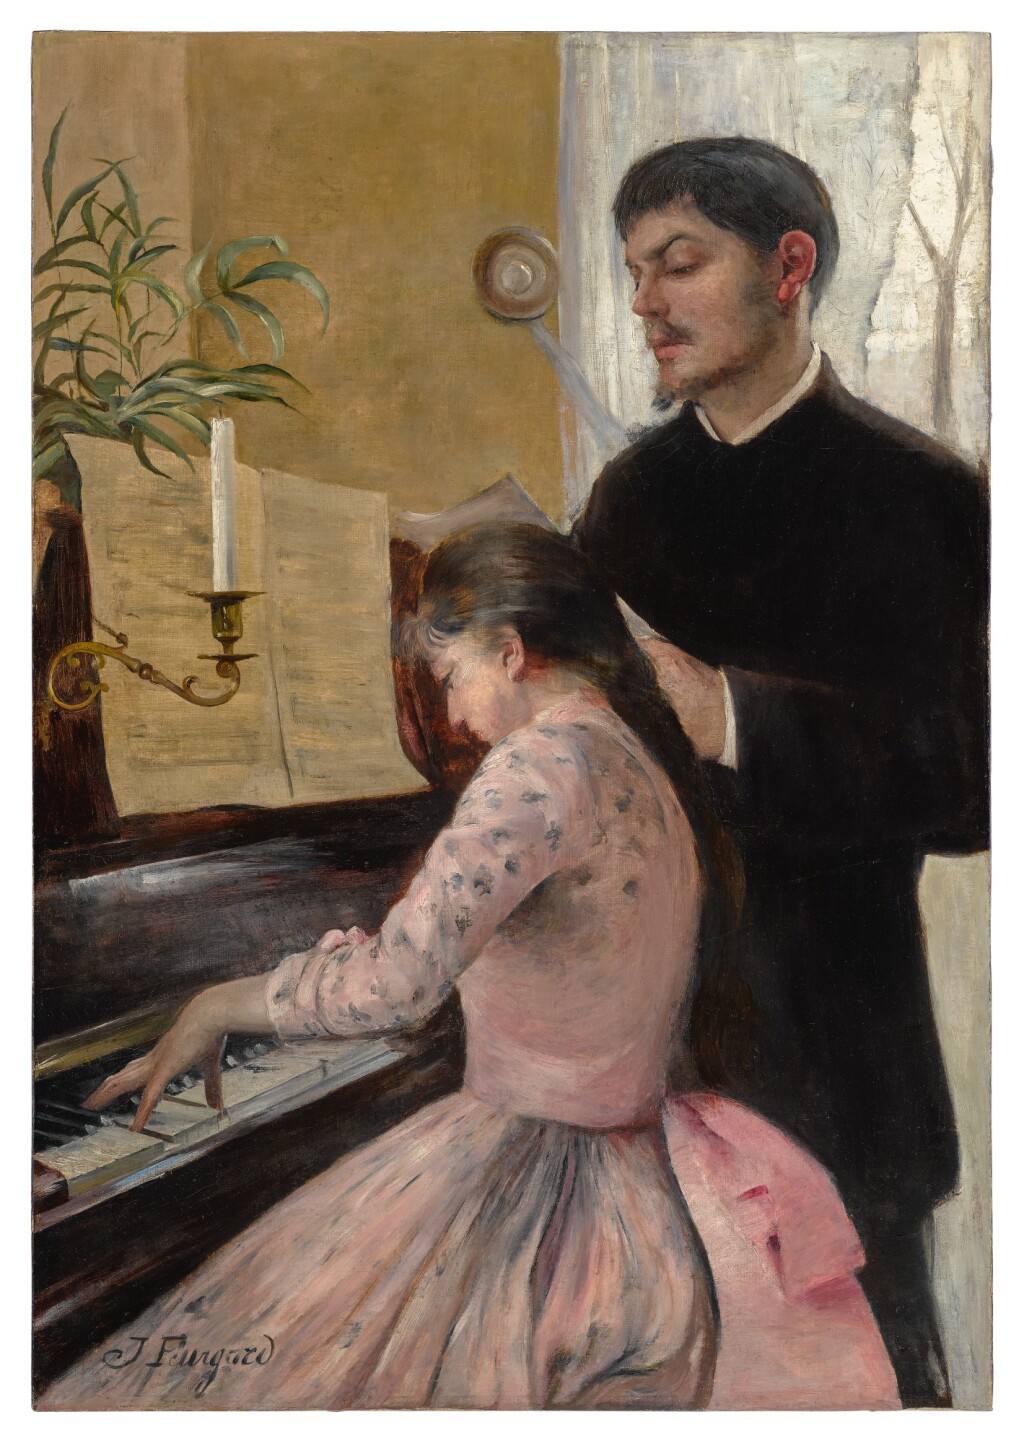  THE PIANO LESSON-JULIE-DELANCE-FEURGARD--